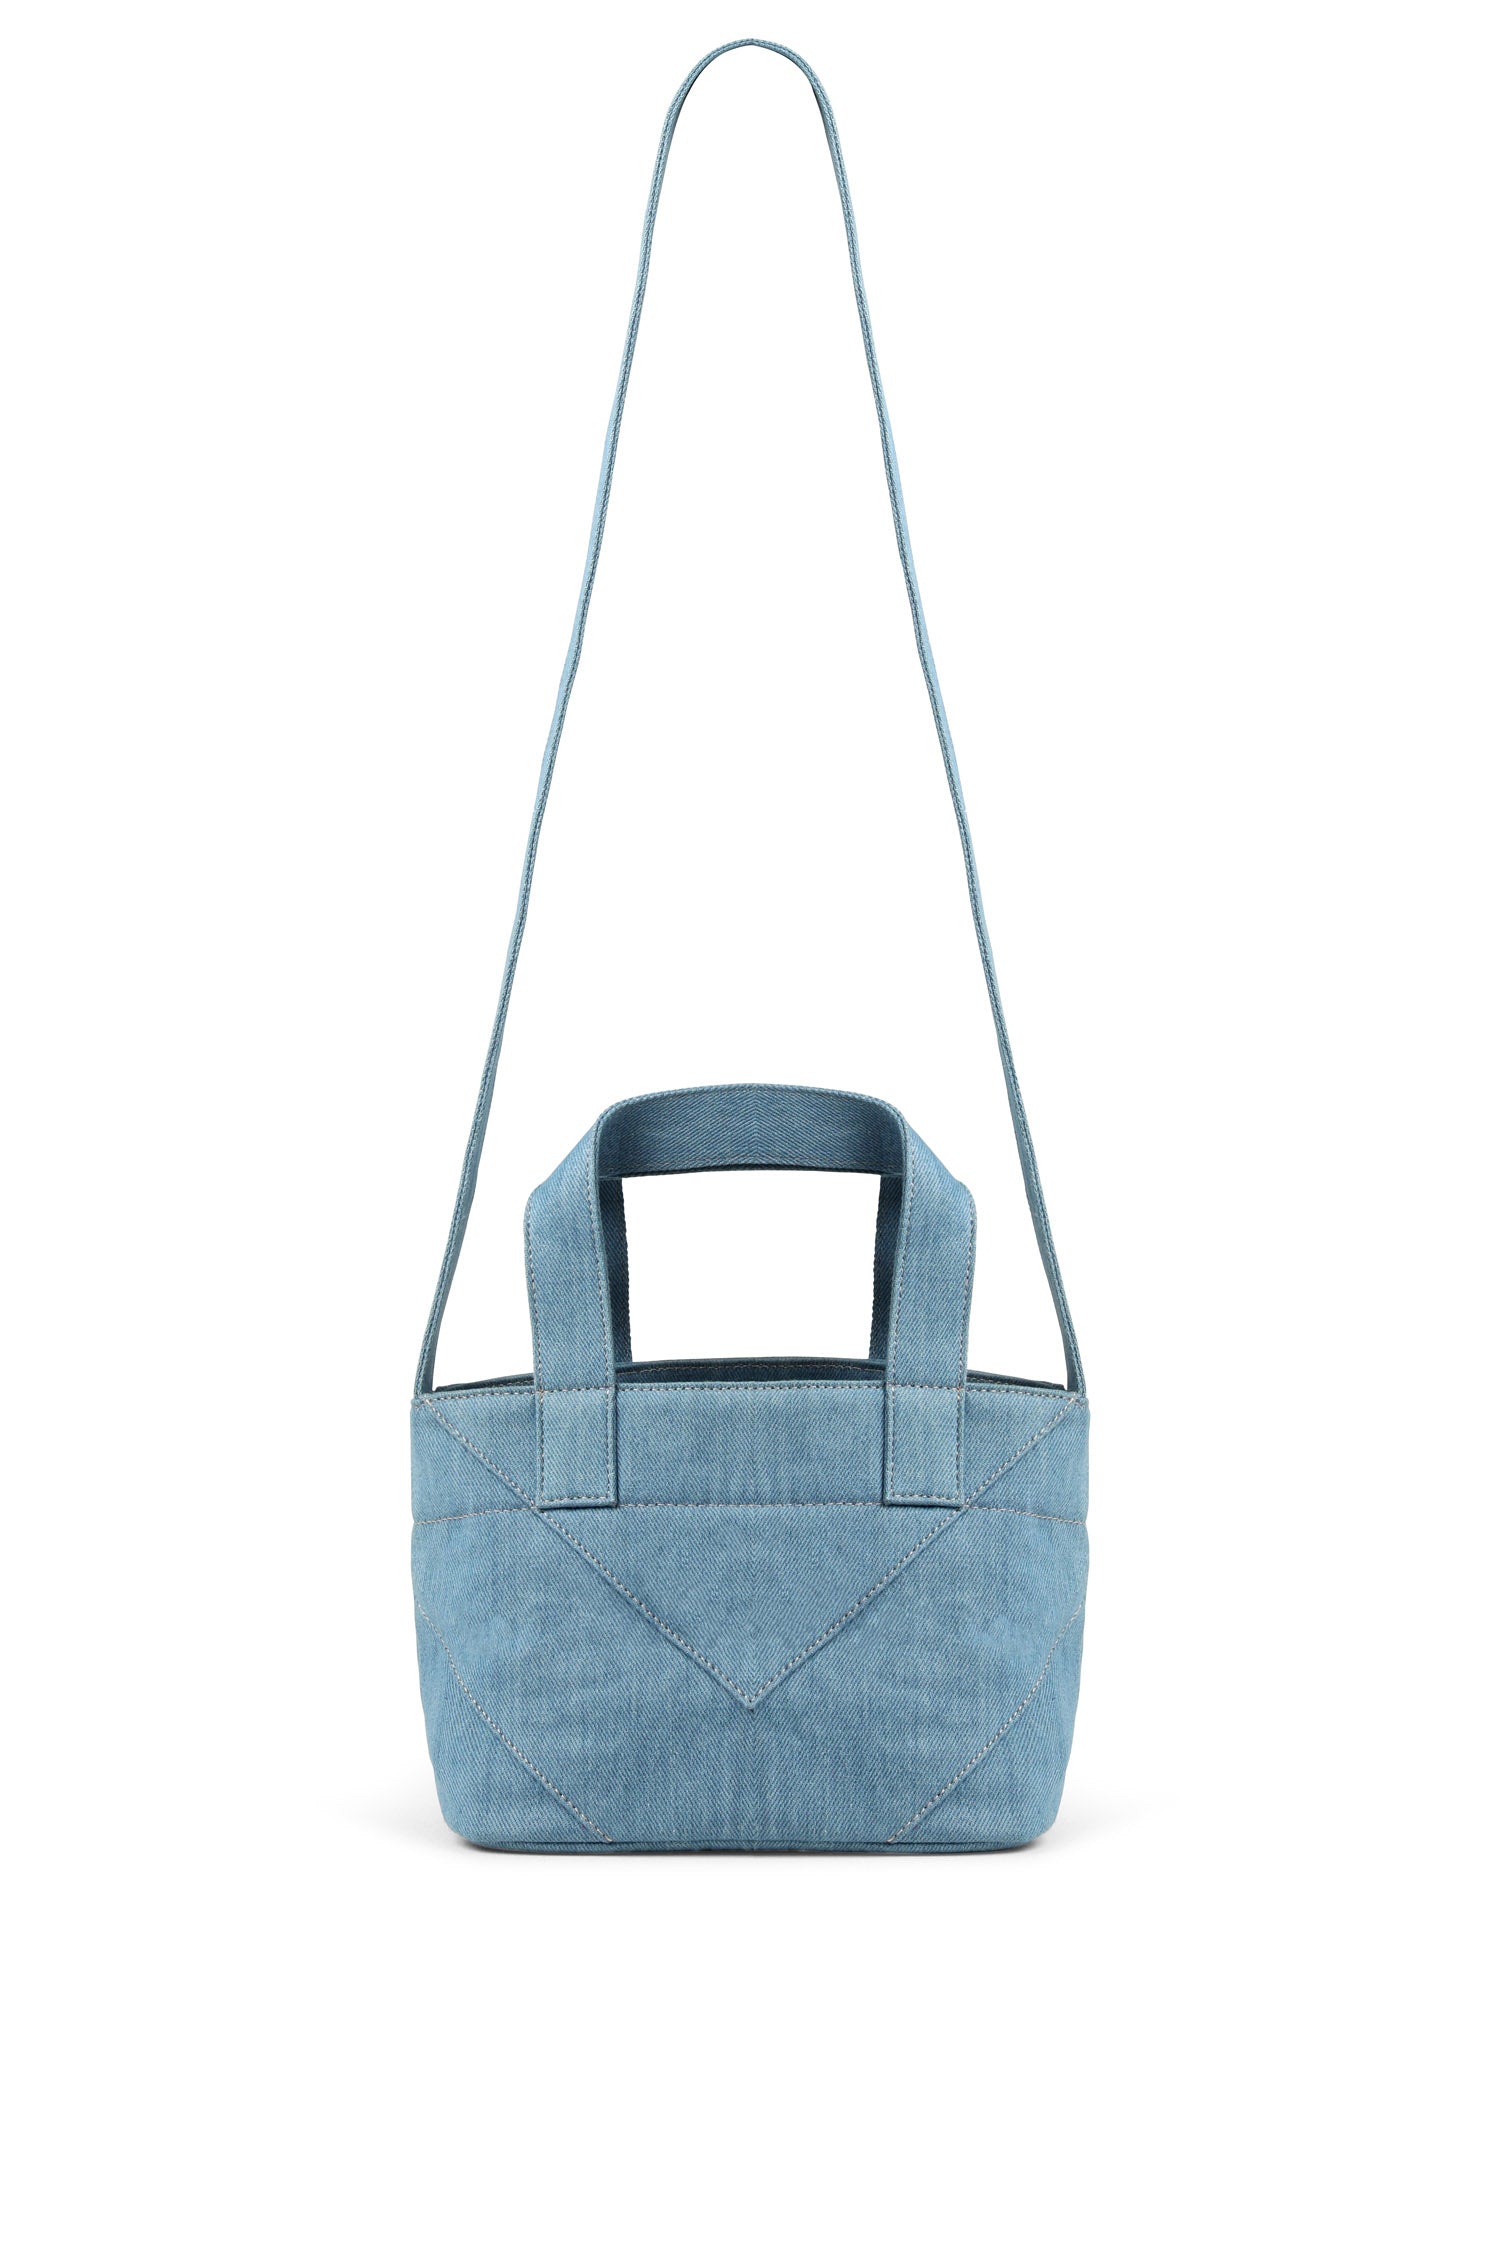 The Denim Mini Tote with Butterflies